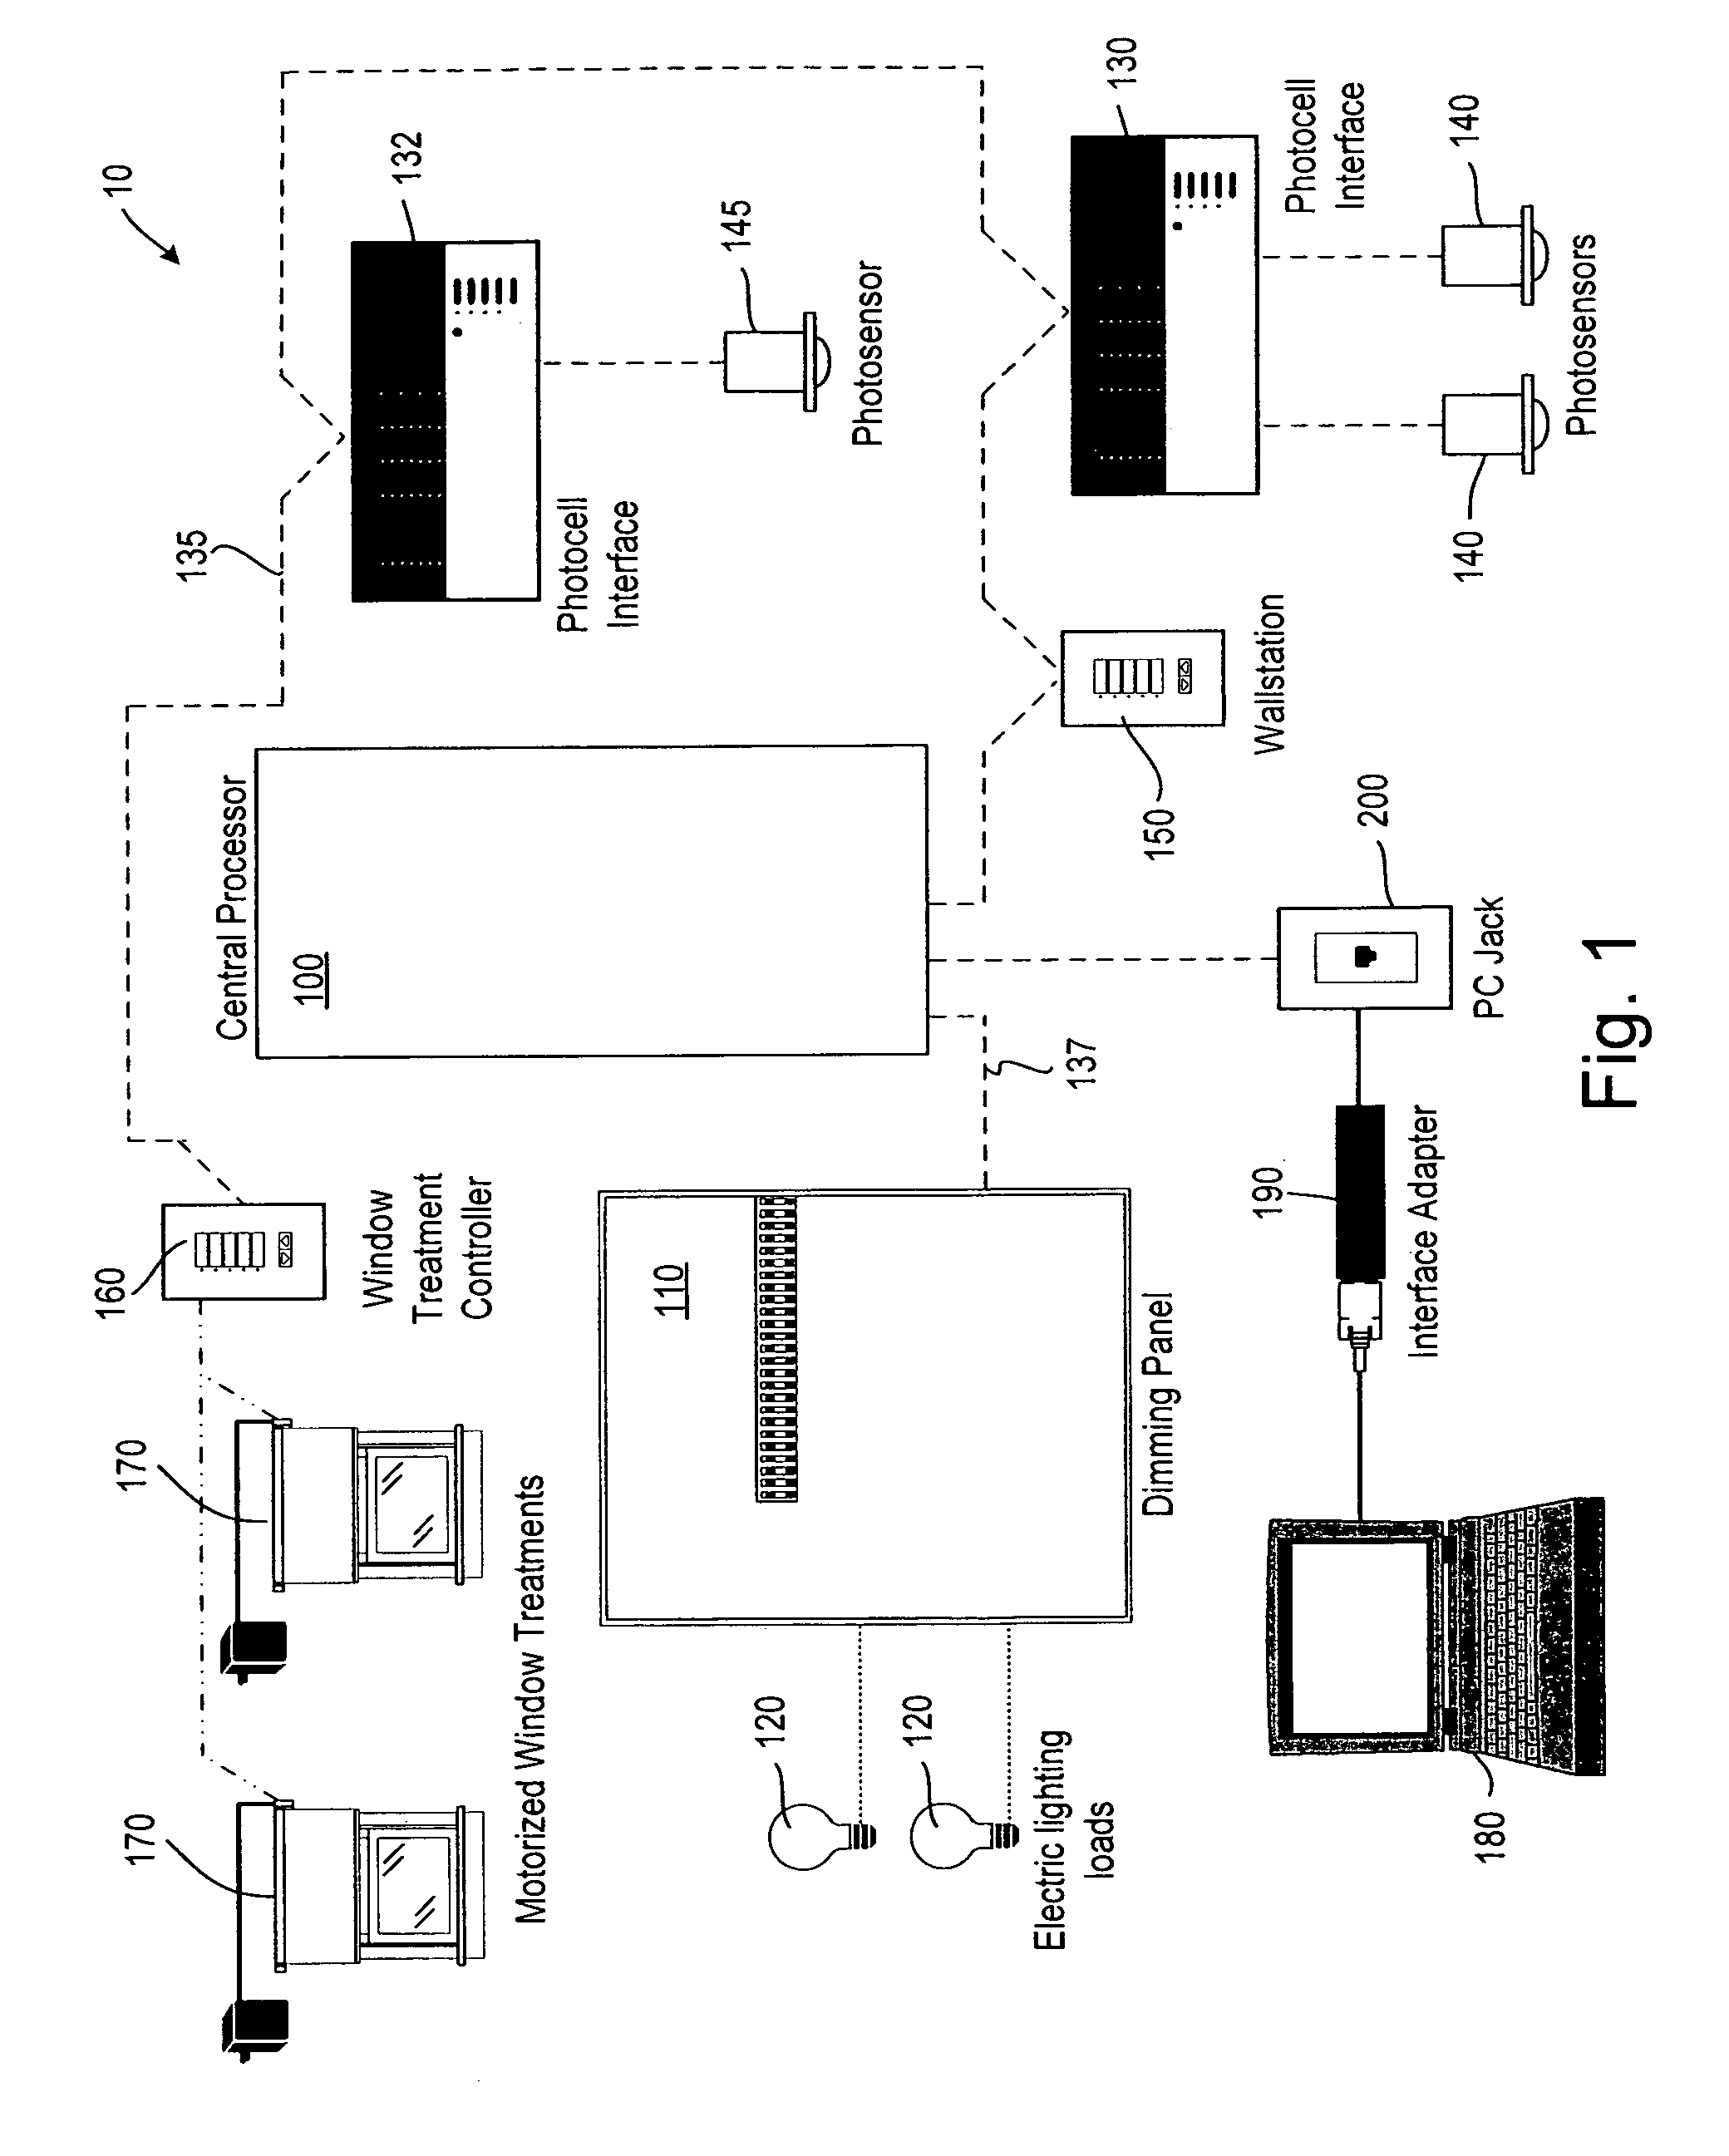 System to control daylight and artificial illumination and sun glare in a space